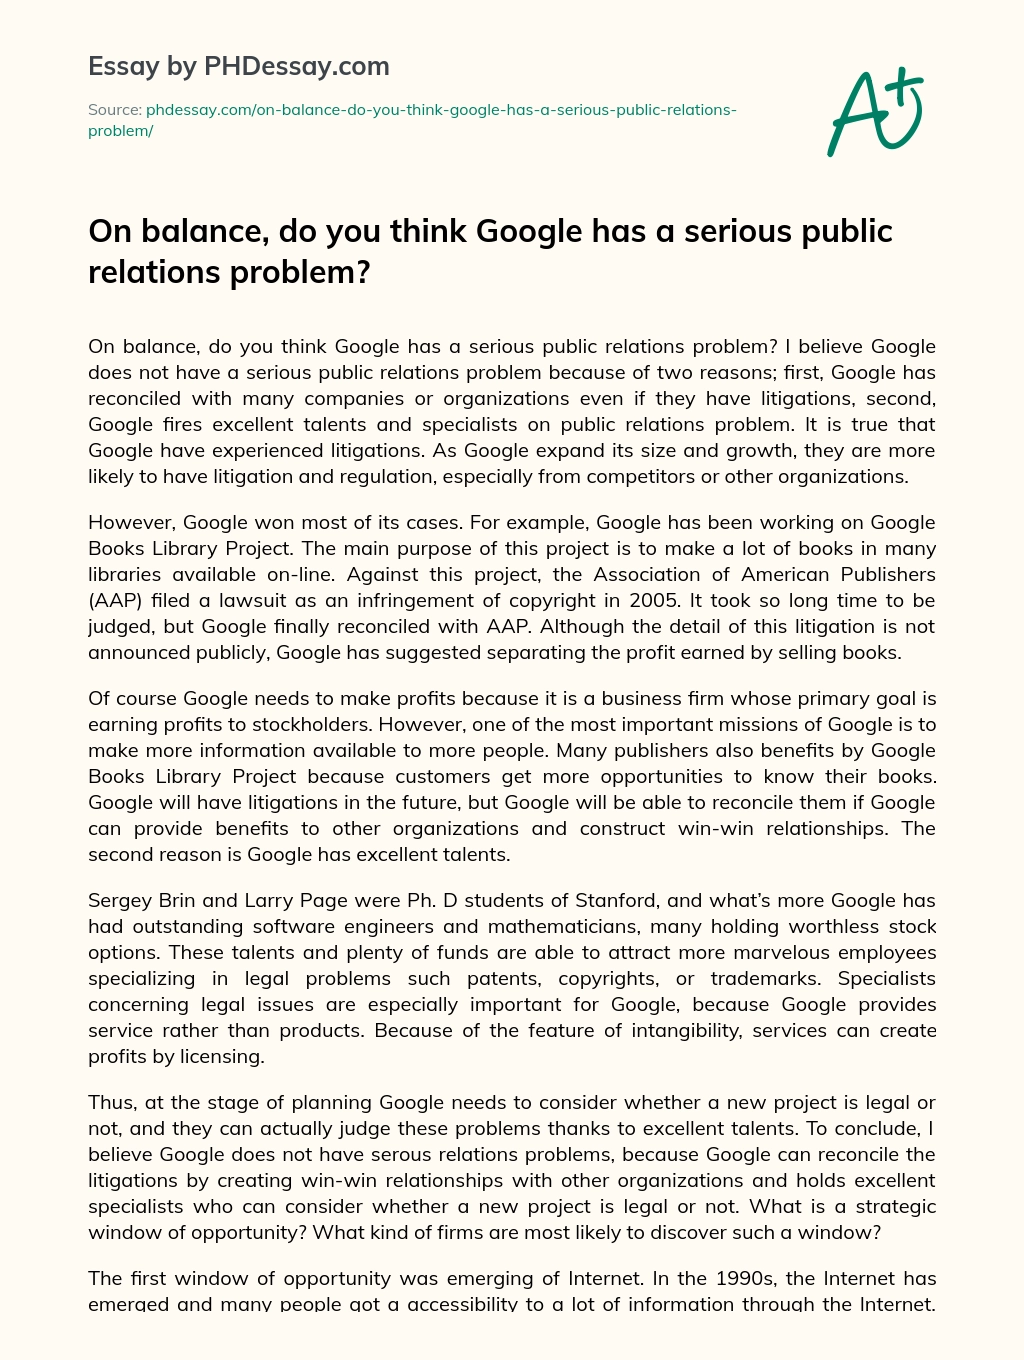 On balance, do you think Google has a serious public relations problem? essay